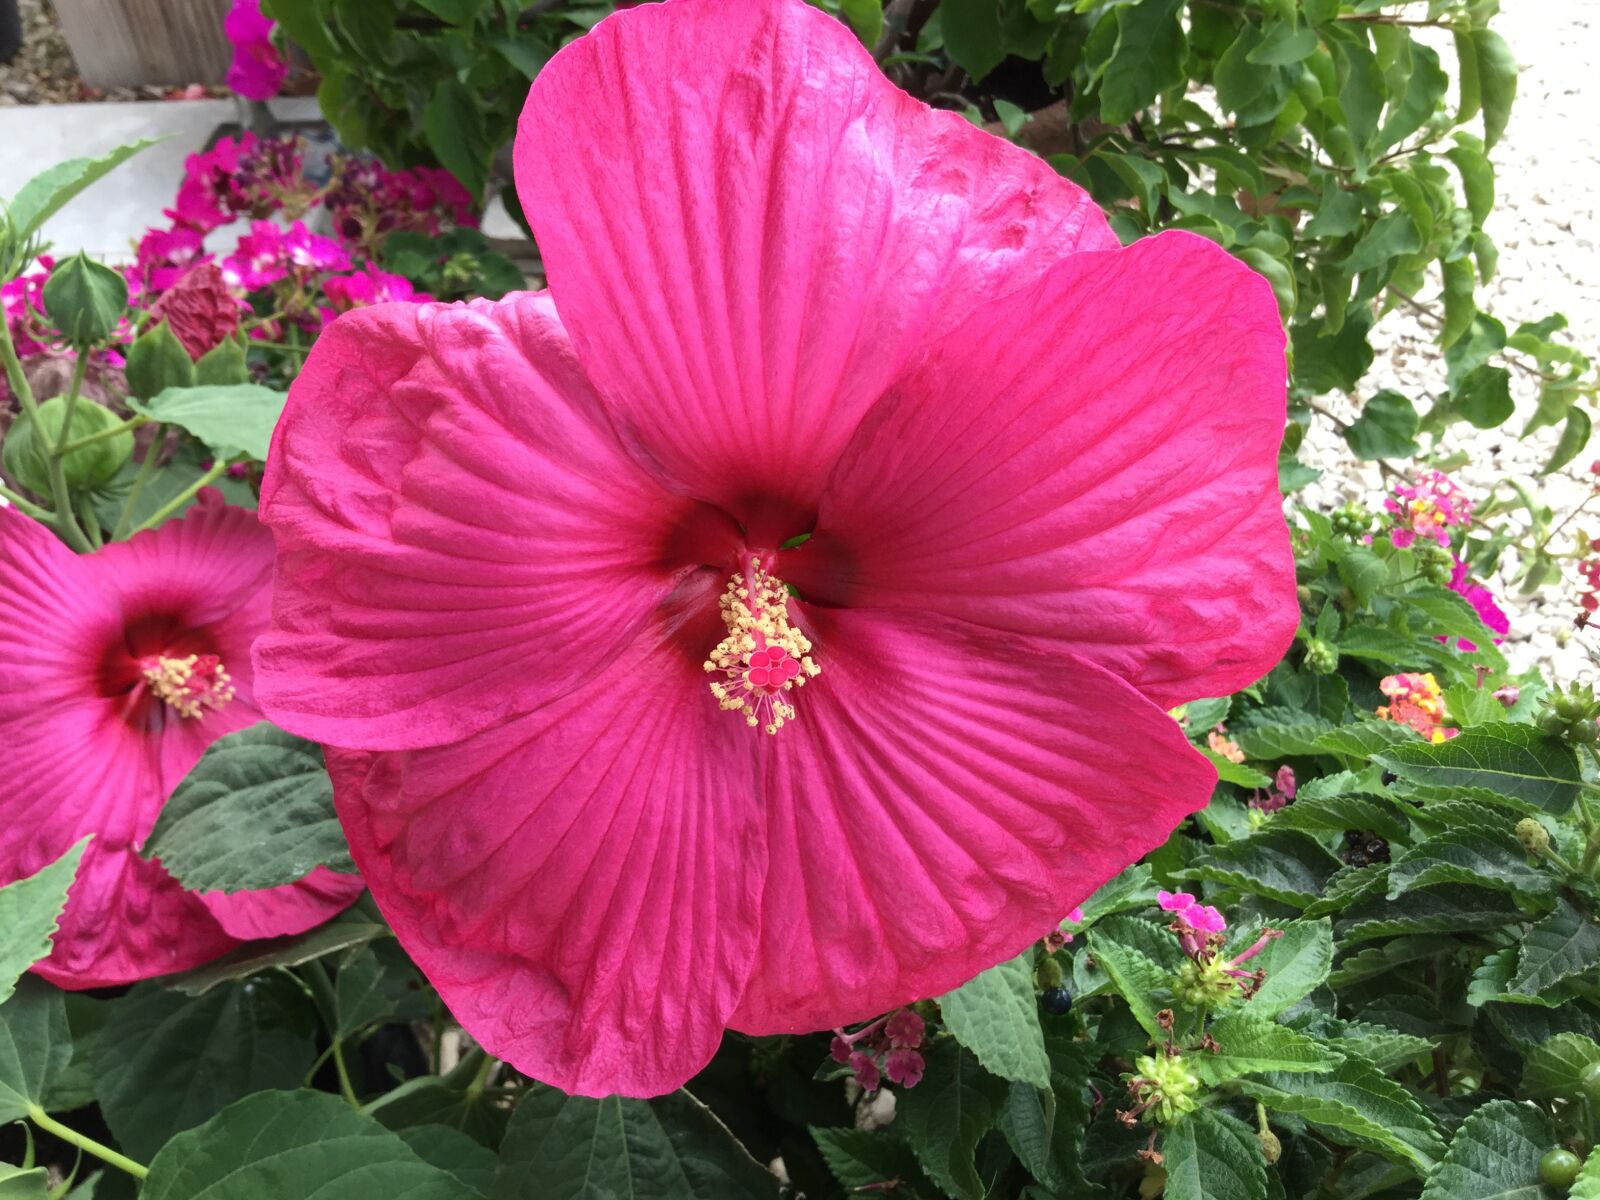 Apple iPad Air 2 sample photo. Hibiscus, flower, floral photography